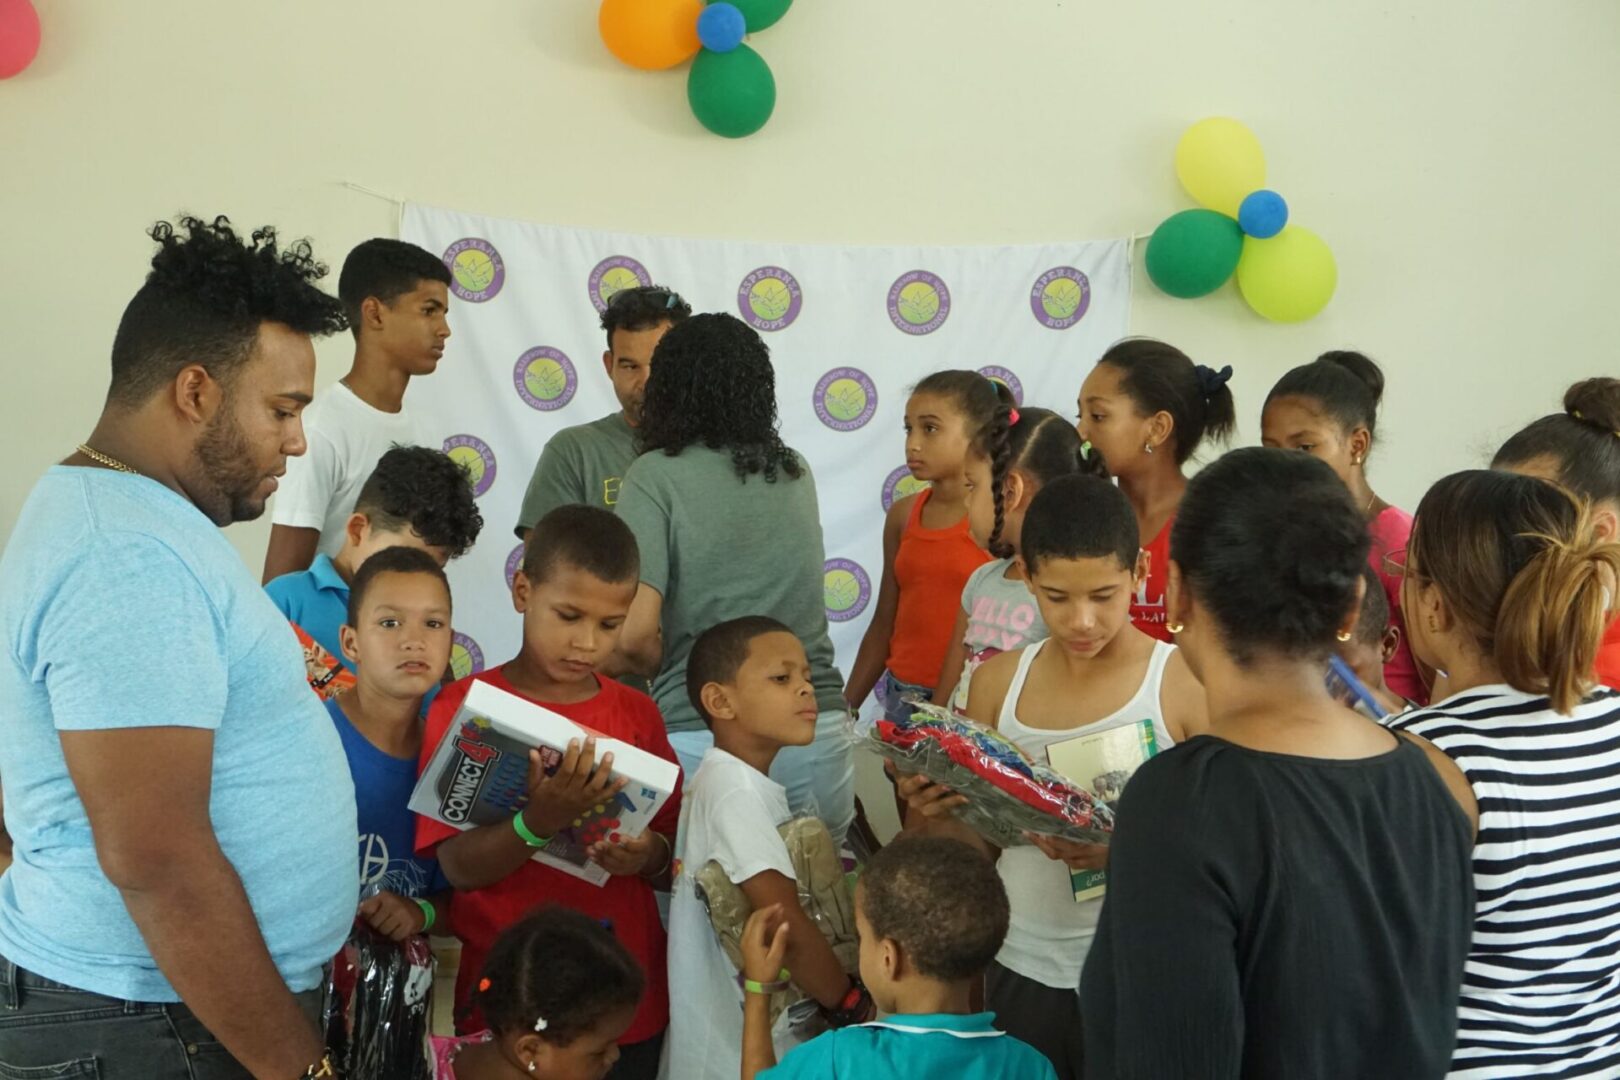 Our staff talking at the back and a group of children holding and looking at their toys